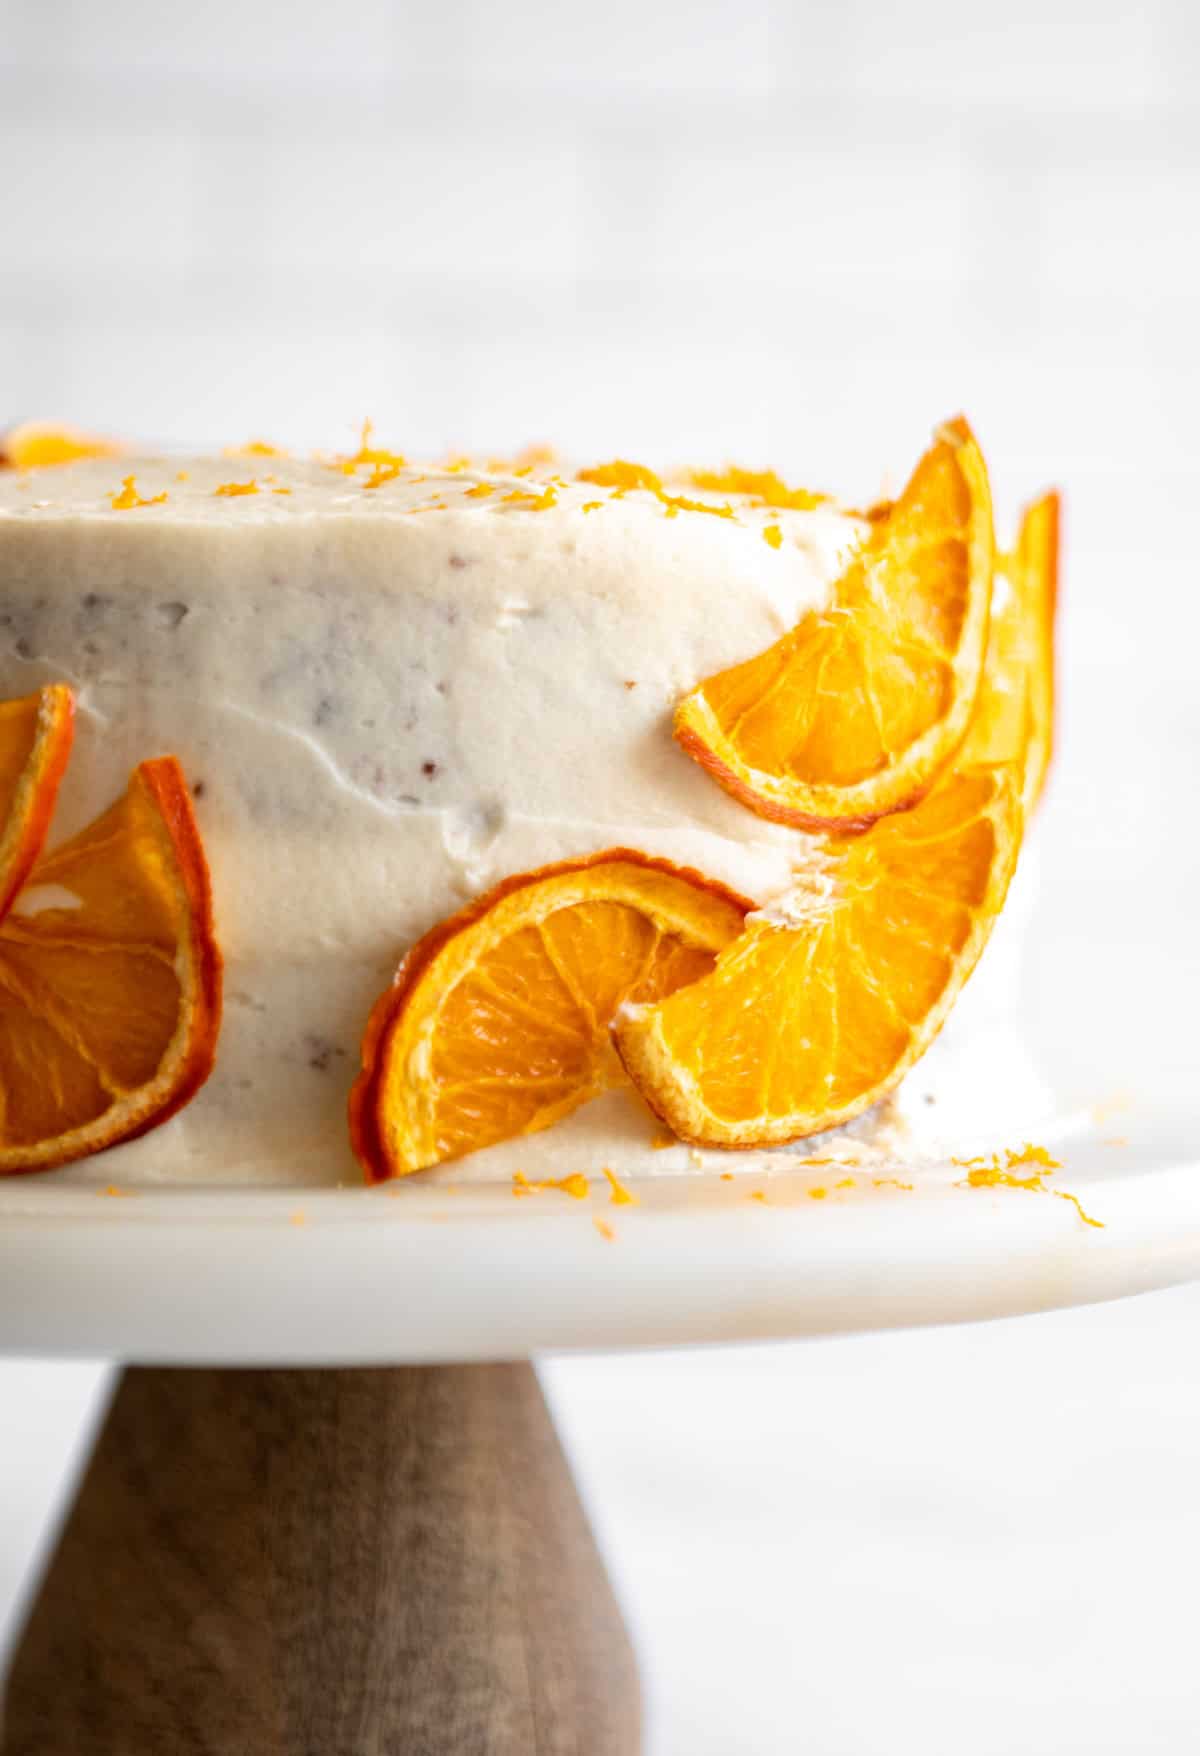 frosted orange cake with orange slices on the side